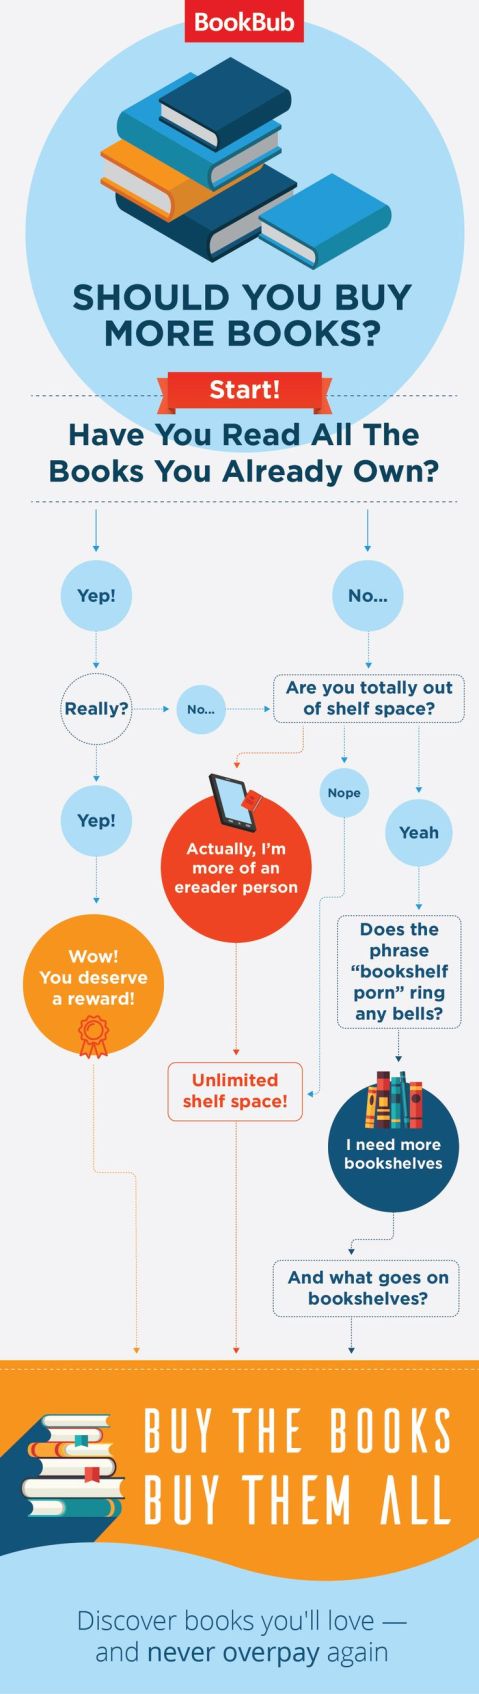 Should-I-buy-more-books-infographic